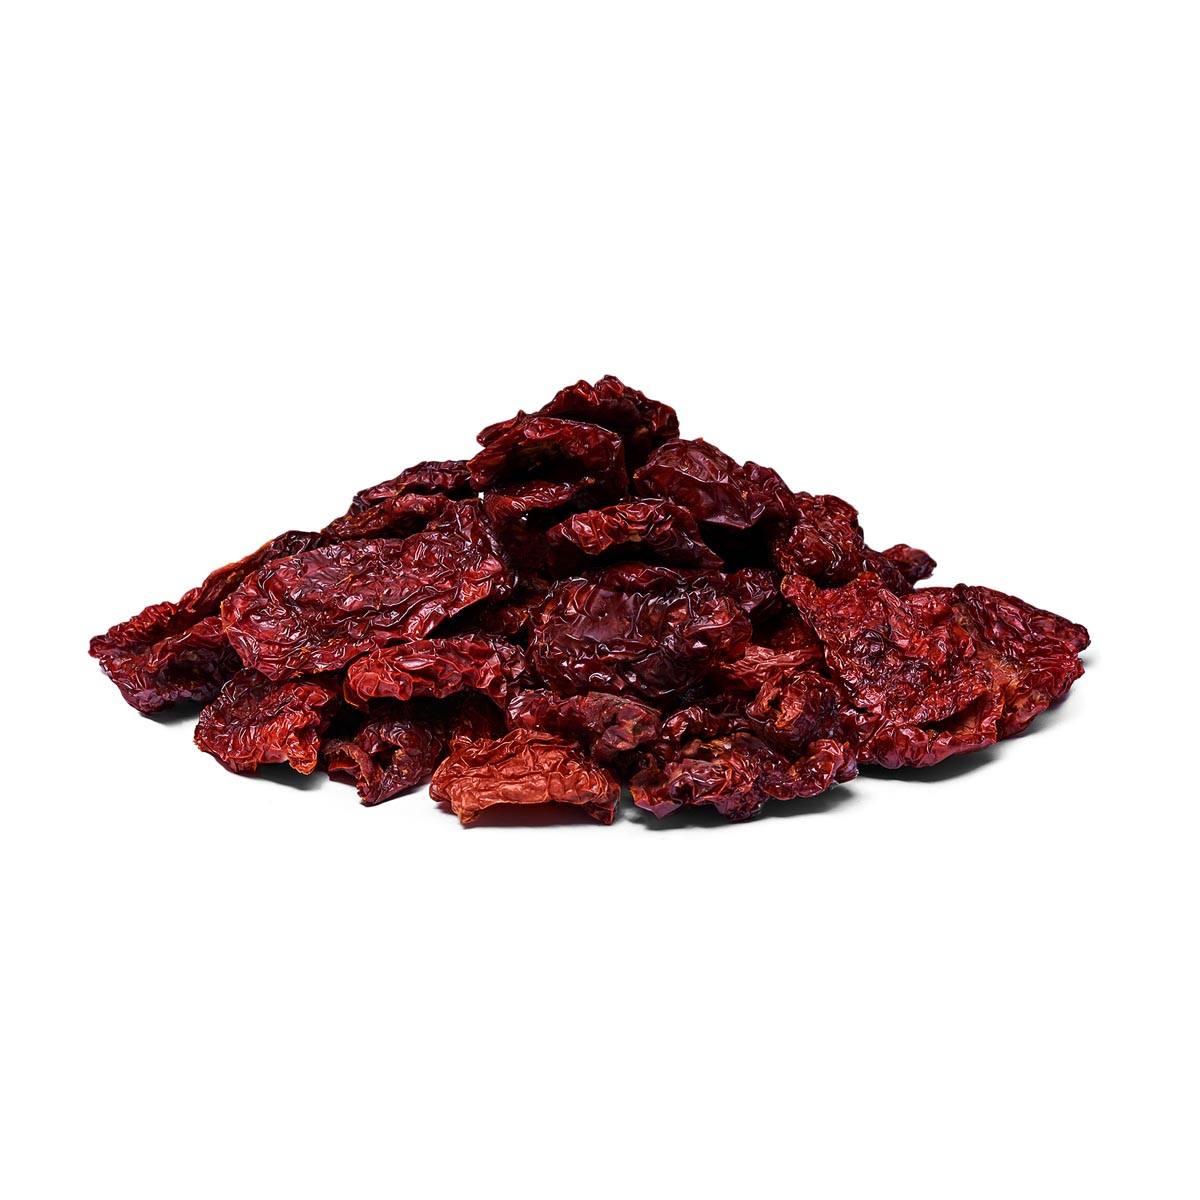 Organic Sun Dried Tomatoes | Raw Living UK | Raw Foods | Raw Living Organic Sun Dried Tomatoes: these are the tastiest Premium Sun-Dried Tomatoes we could find. Use for a range of culinary creations, including sauces.